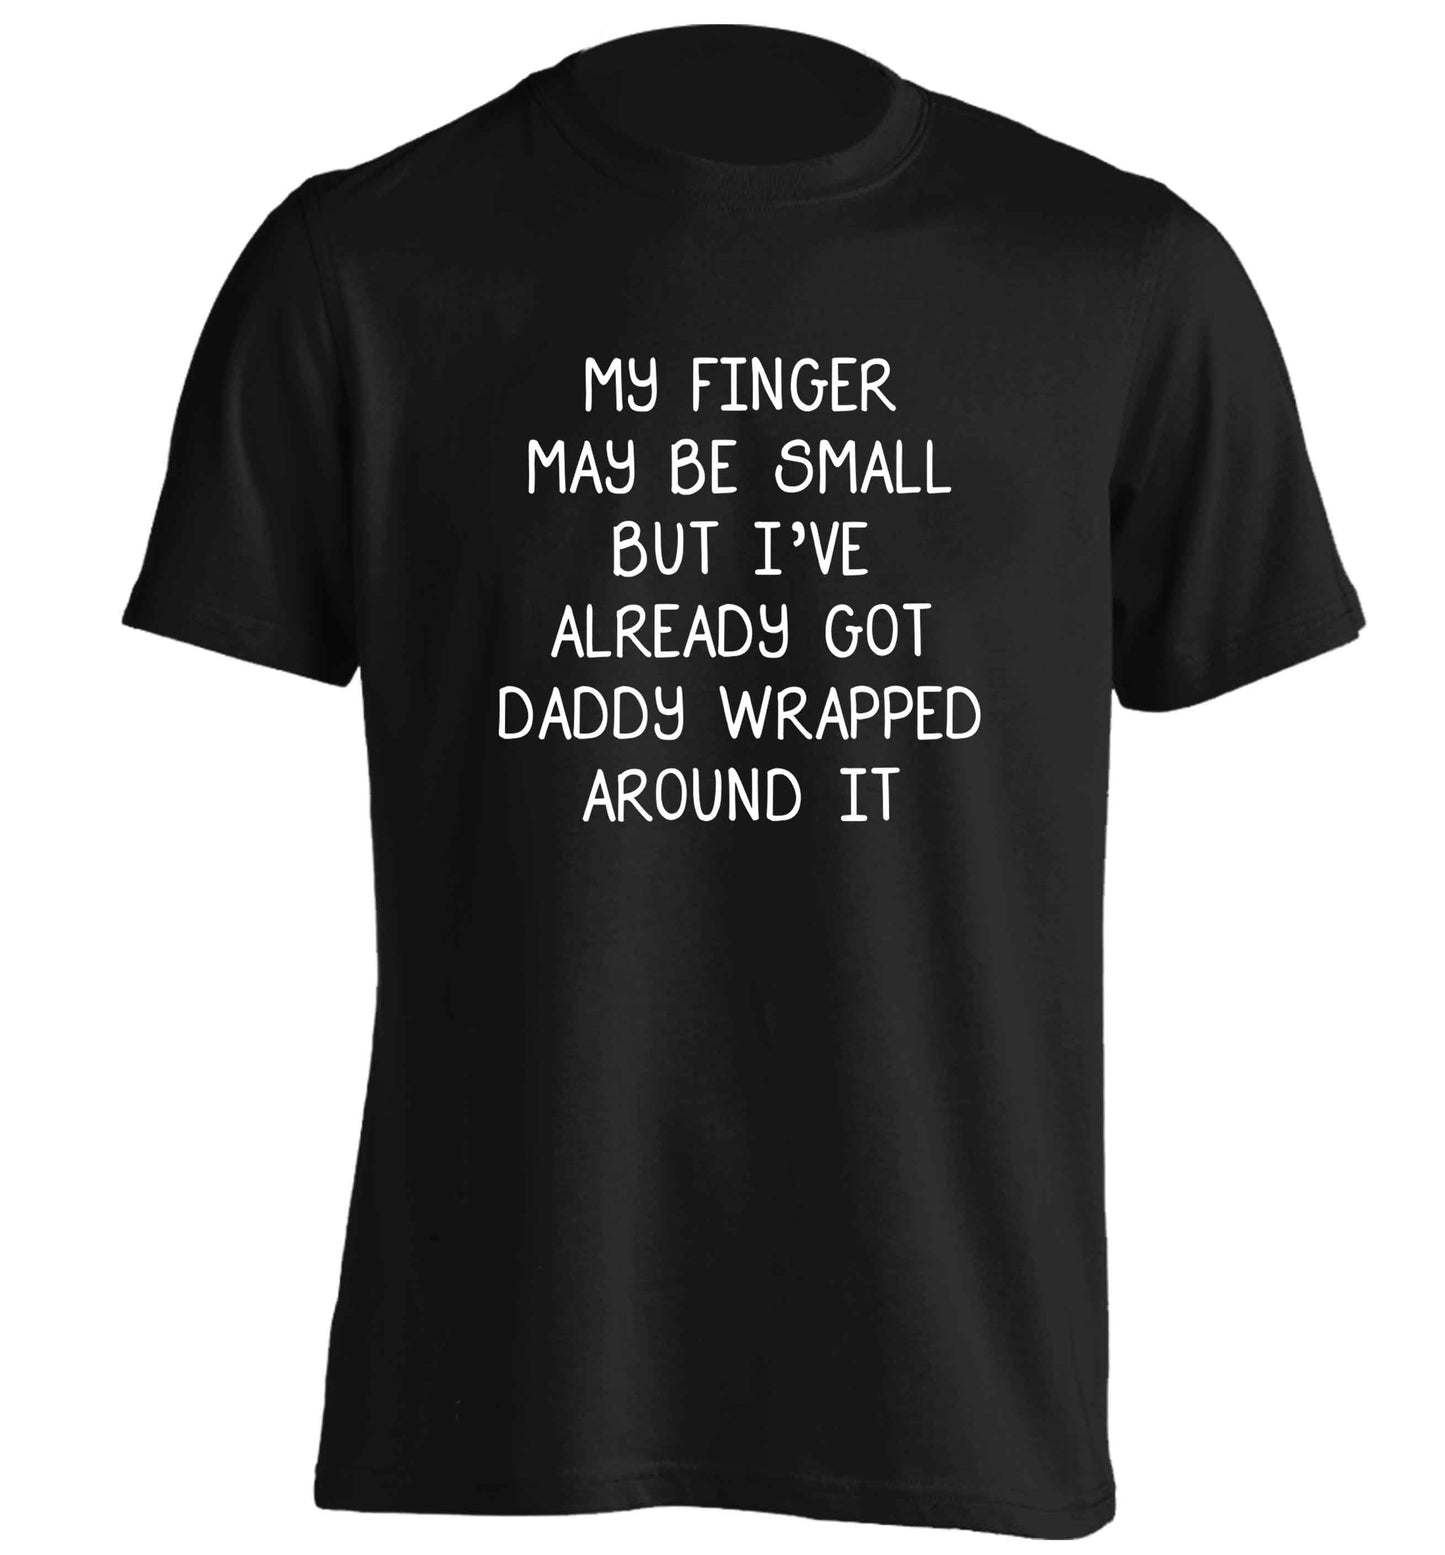 My finger may be small but I've already got daddy wrapped around it adults unisex black Tshirt 2XL